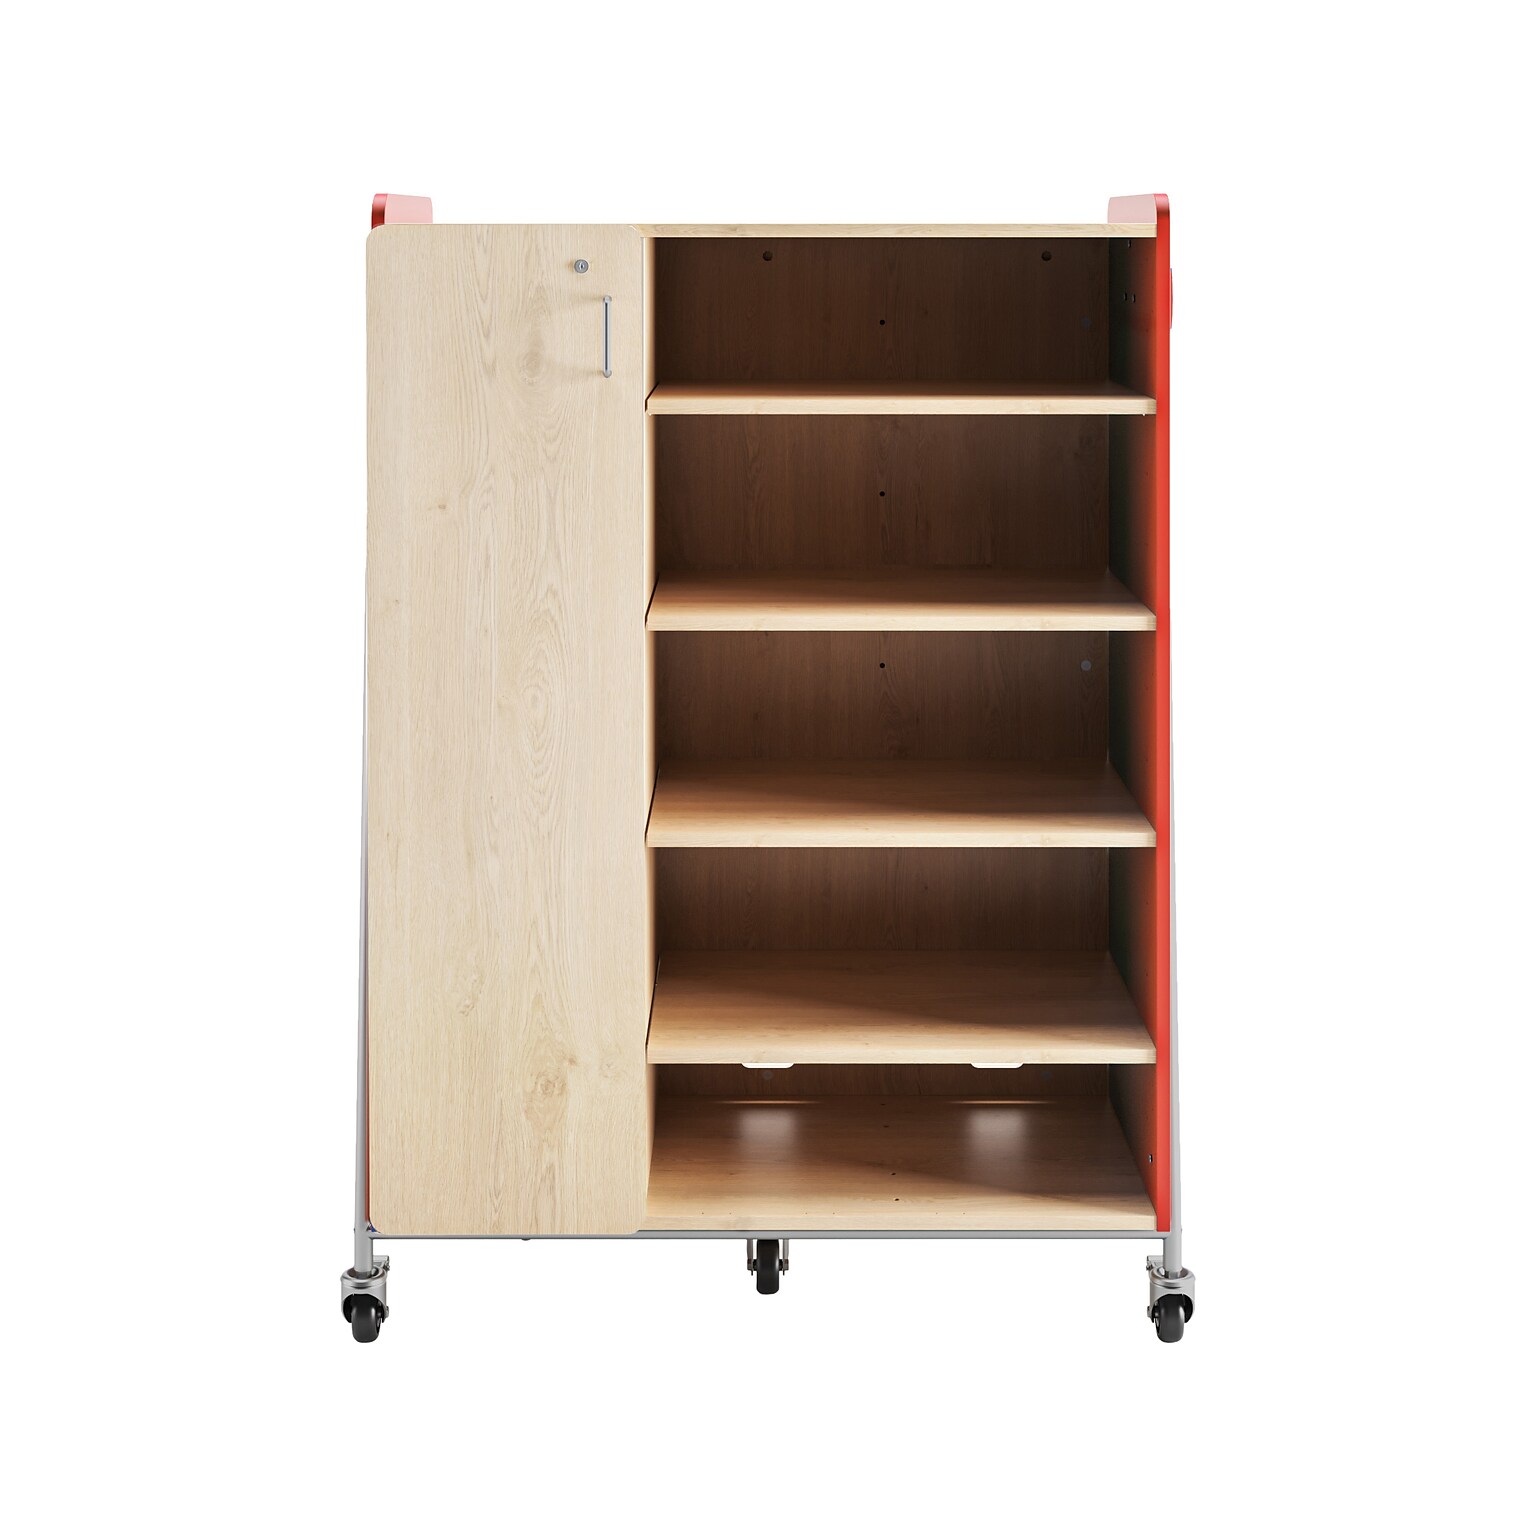 Safco Whiffle Typical 4 60 x 43 Particle Board Triple-Column Mobile Storage, Red (3924RED)